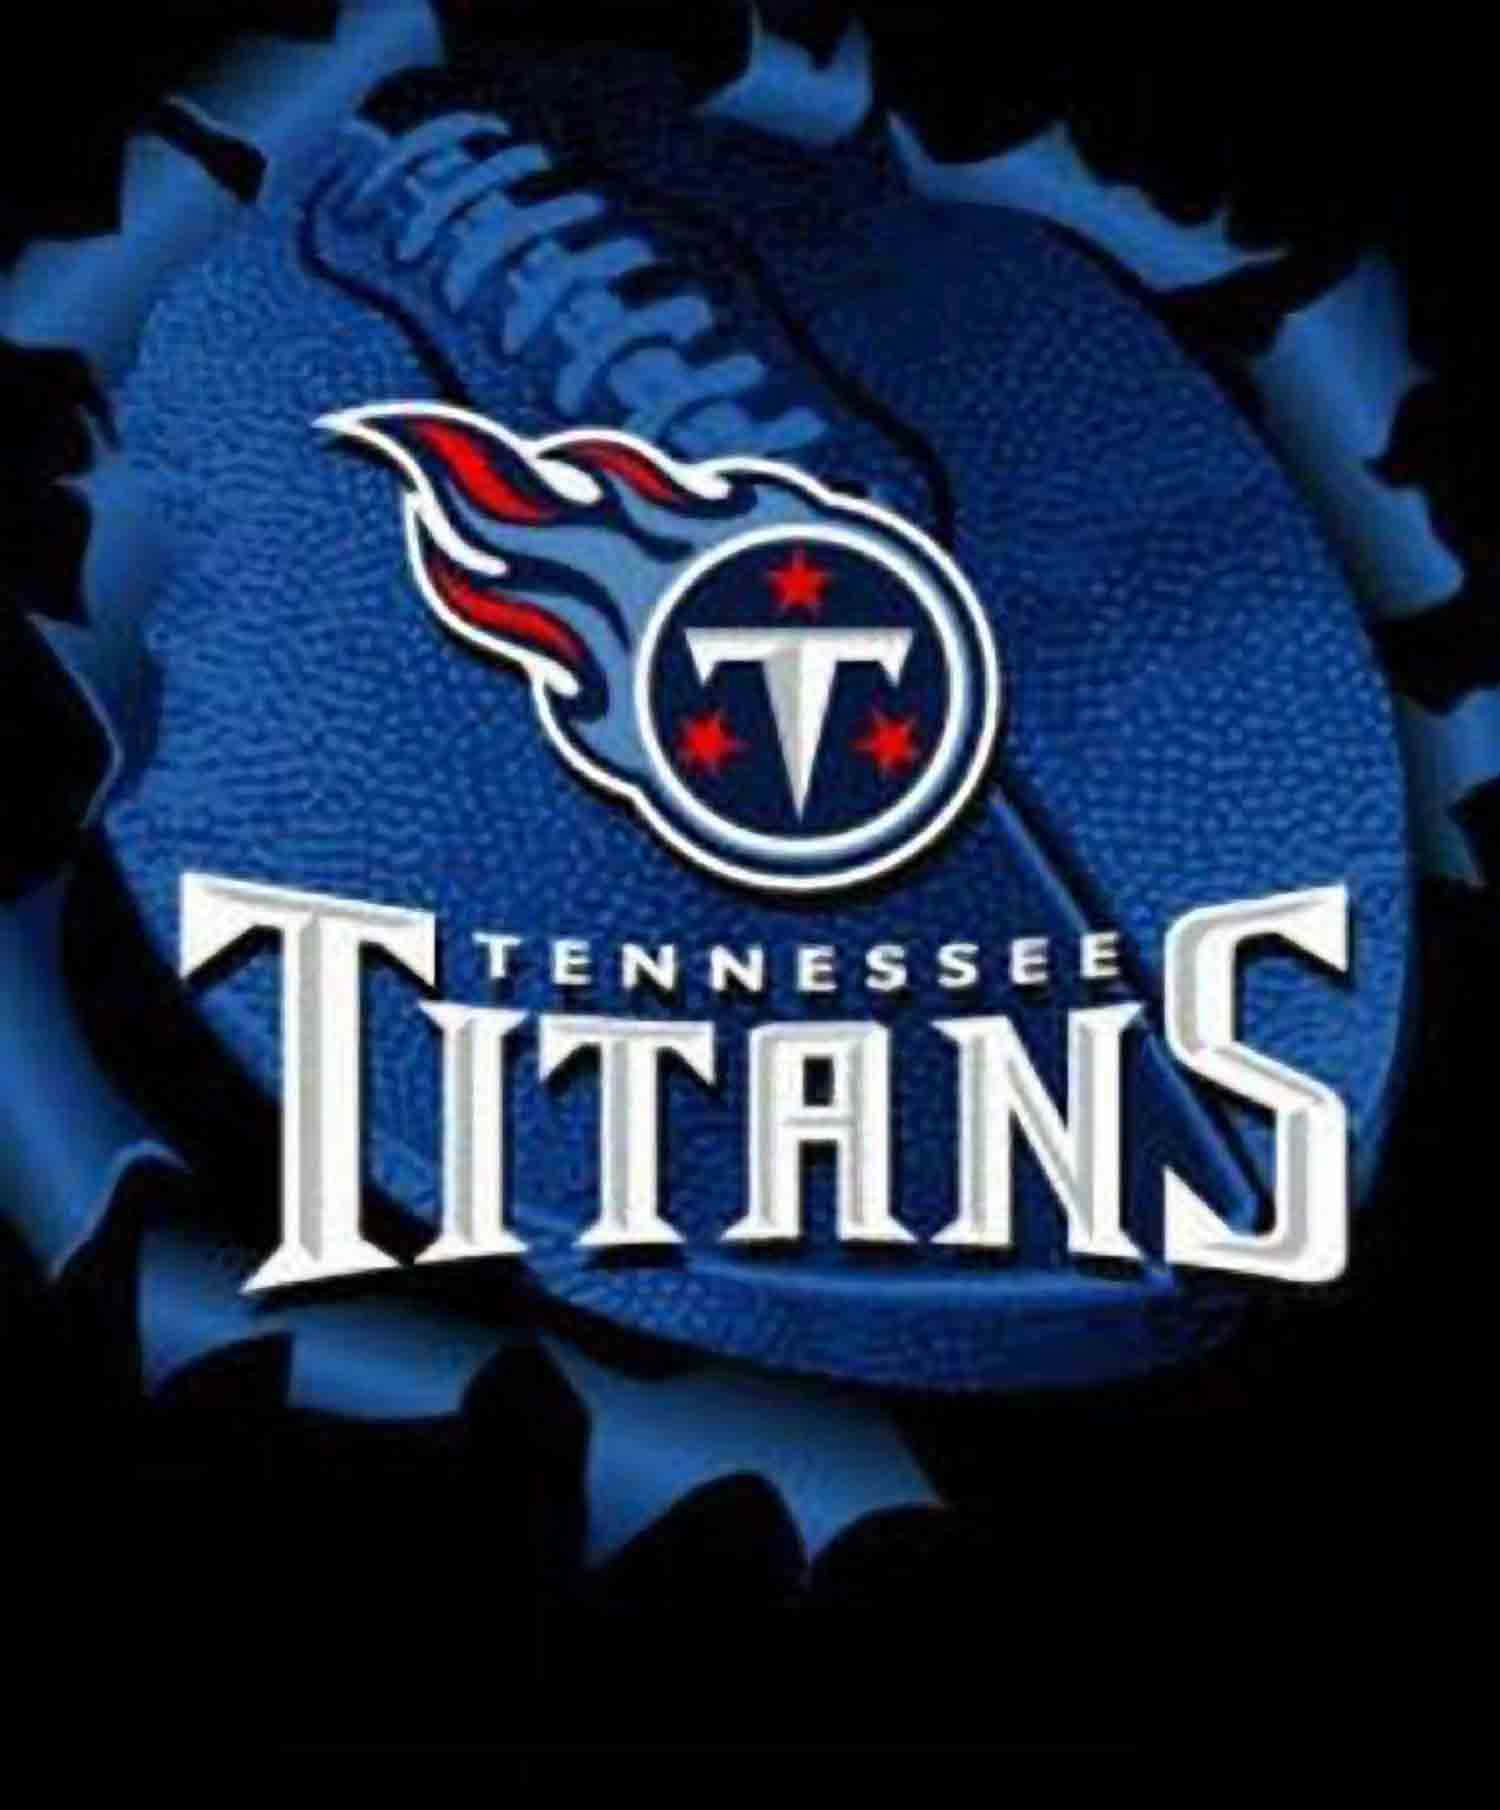 Get ready to show your team spirit with the Tennessee Titans iPhone Wallpaper